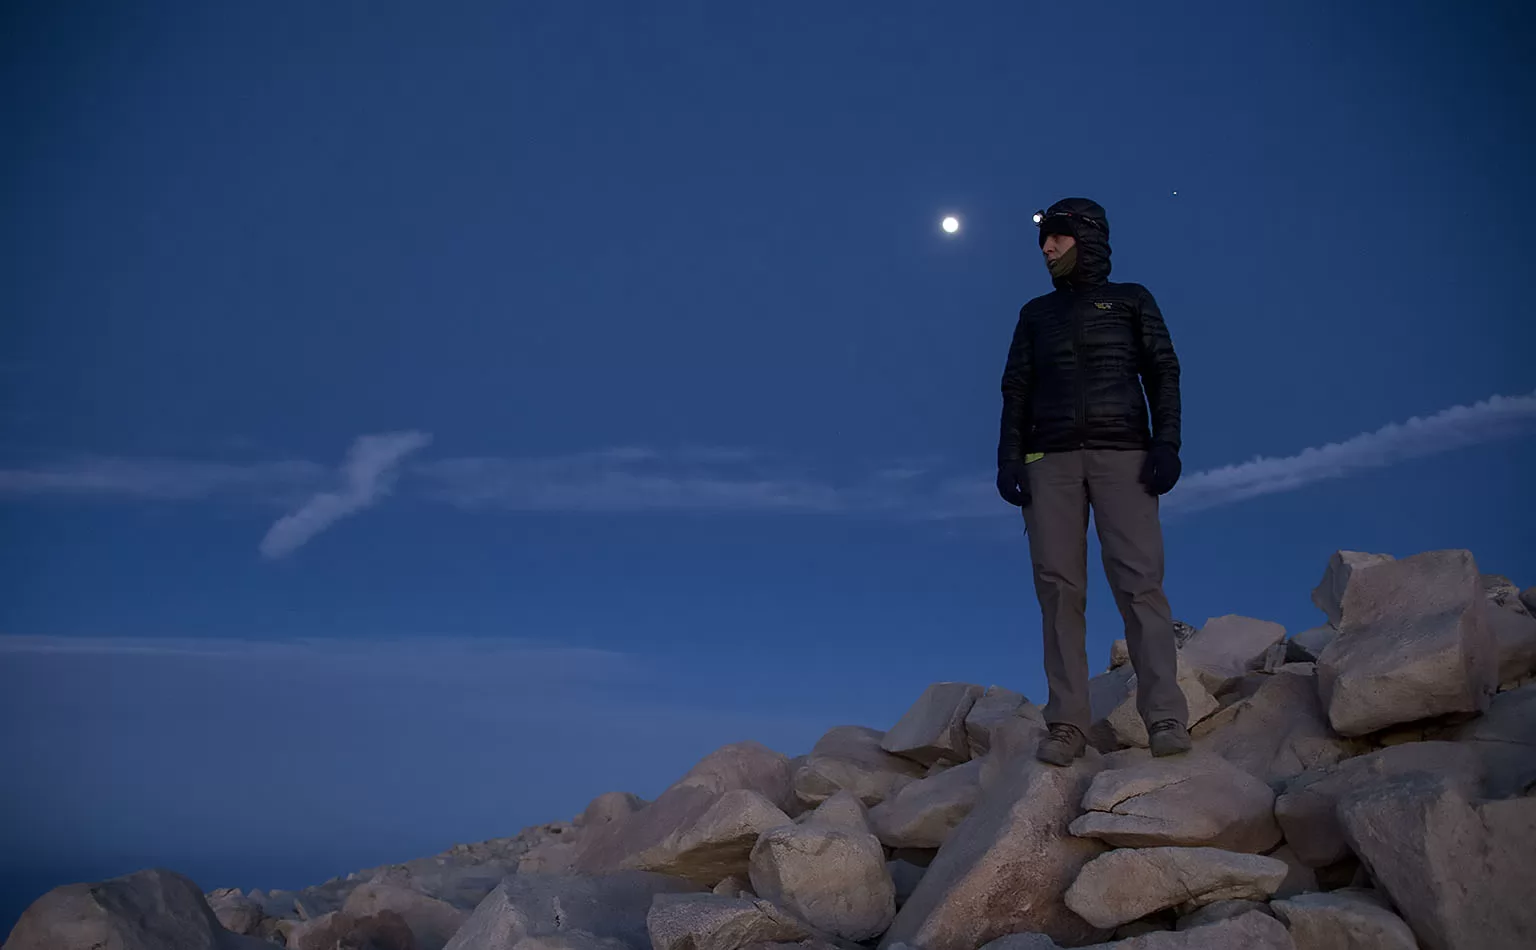 Em with her H7 on the summit of Mt. San Gorgonio, preparing for a moonlight hike back to our campsite